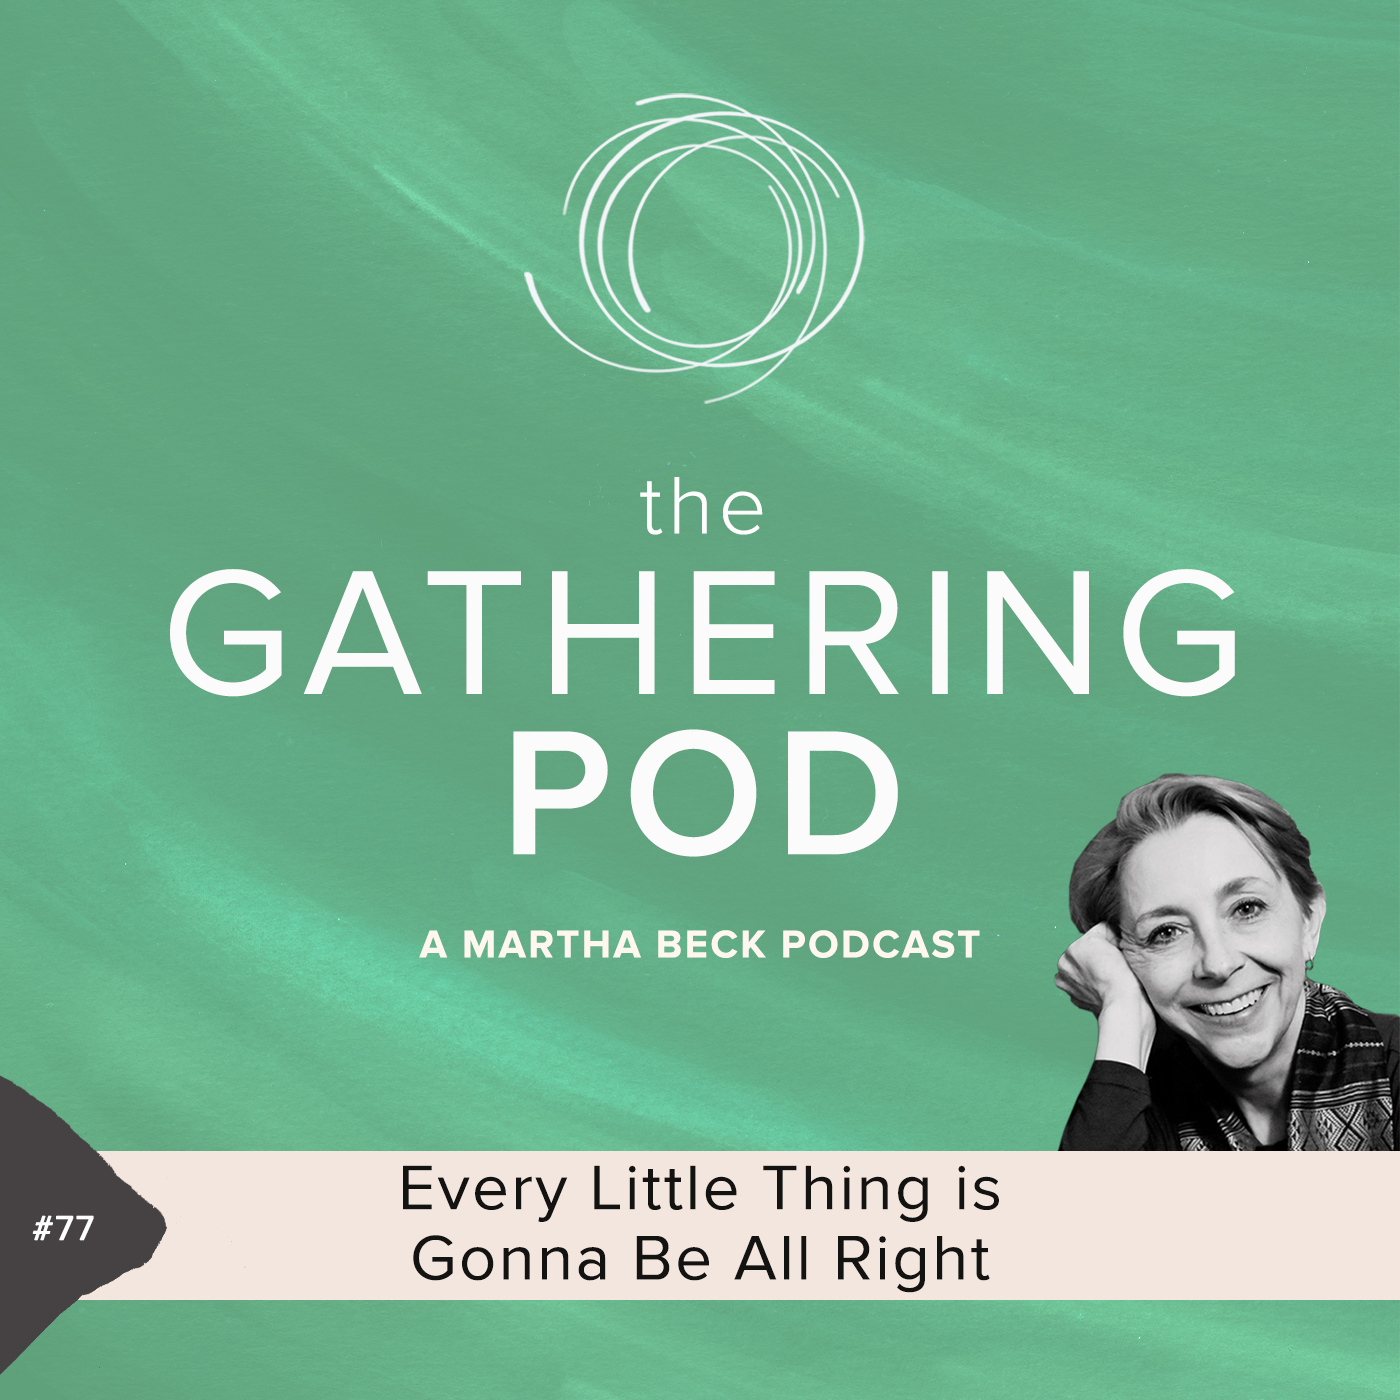 Image for The Gathering Pod A Martha Beck Podcast Episode #77 Every Little Thing is Gonna Be All Right